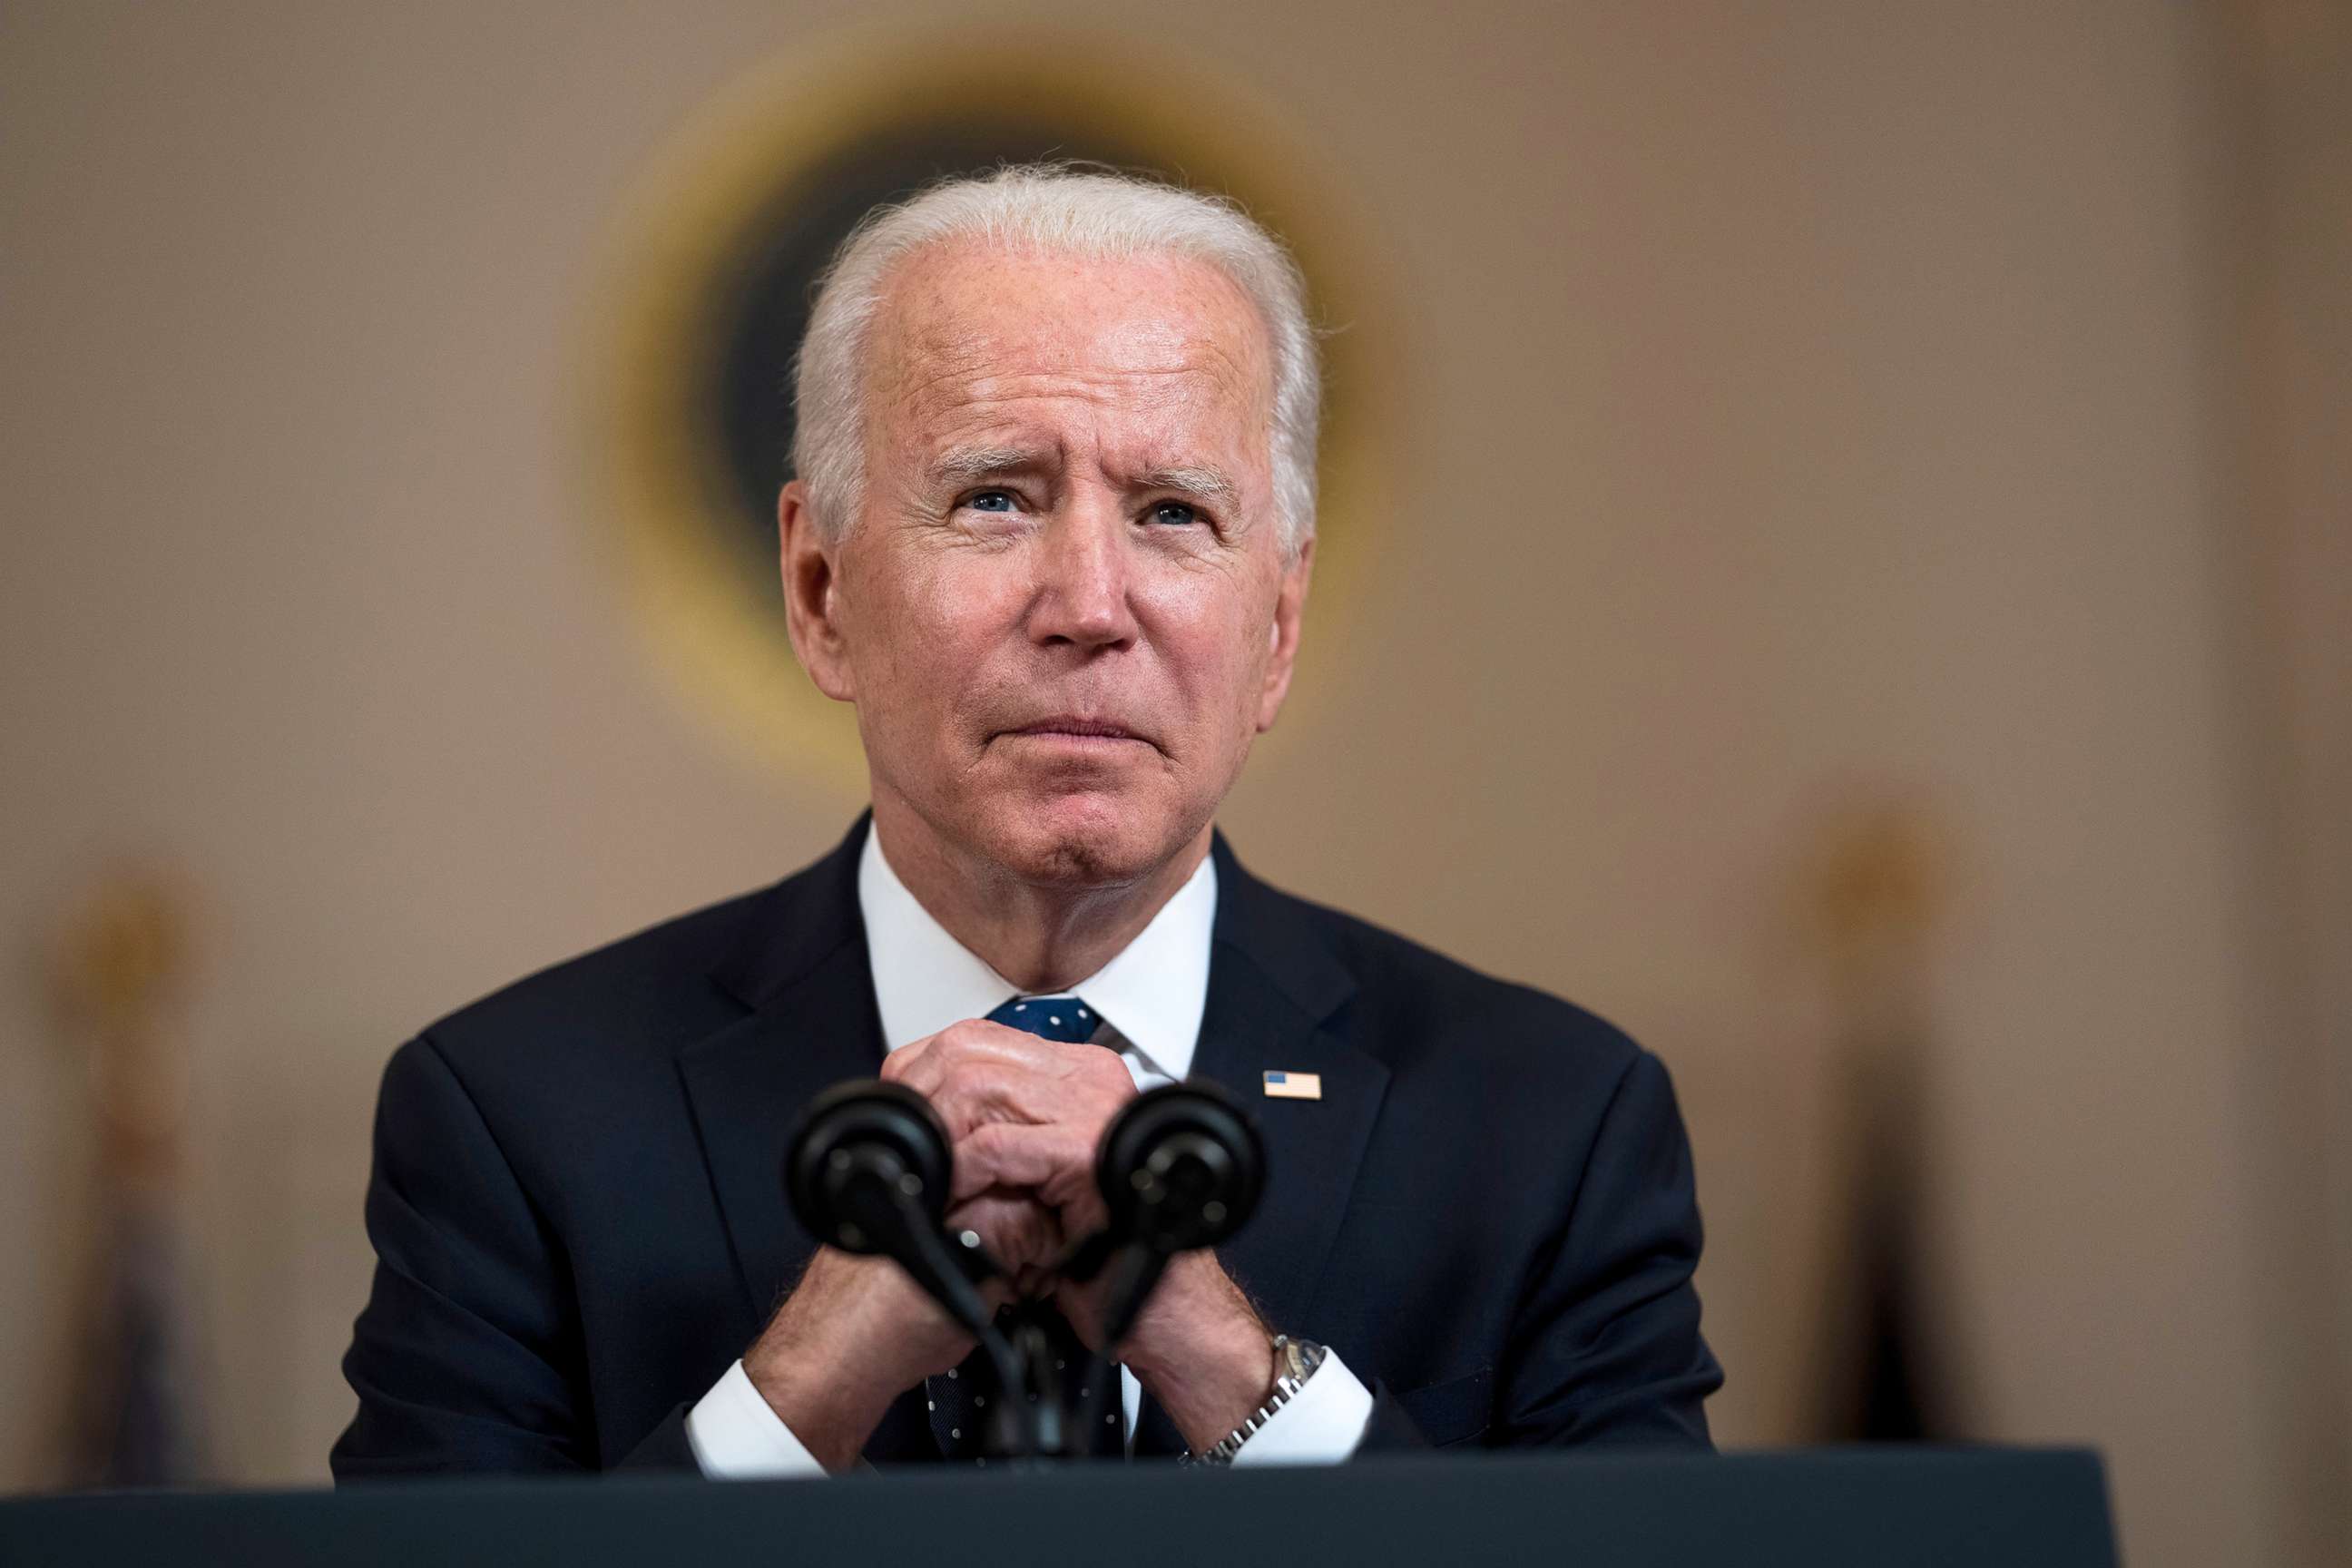 PHOTO: President Joe Biden makes remarks in response to the verdict in the murder trial of former Minneapolis police officer Derek Chauvin at the Cross Hall of the White House April 20, 2021.